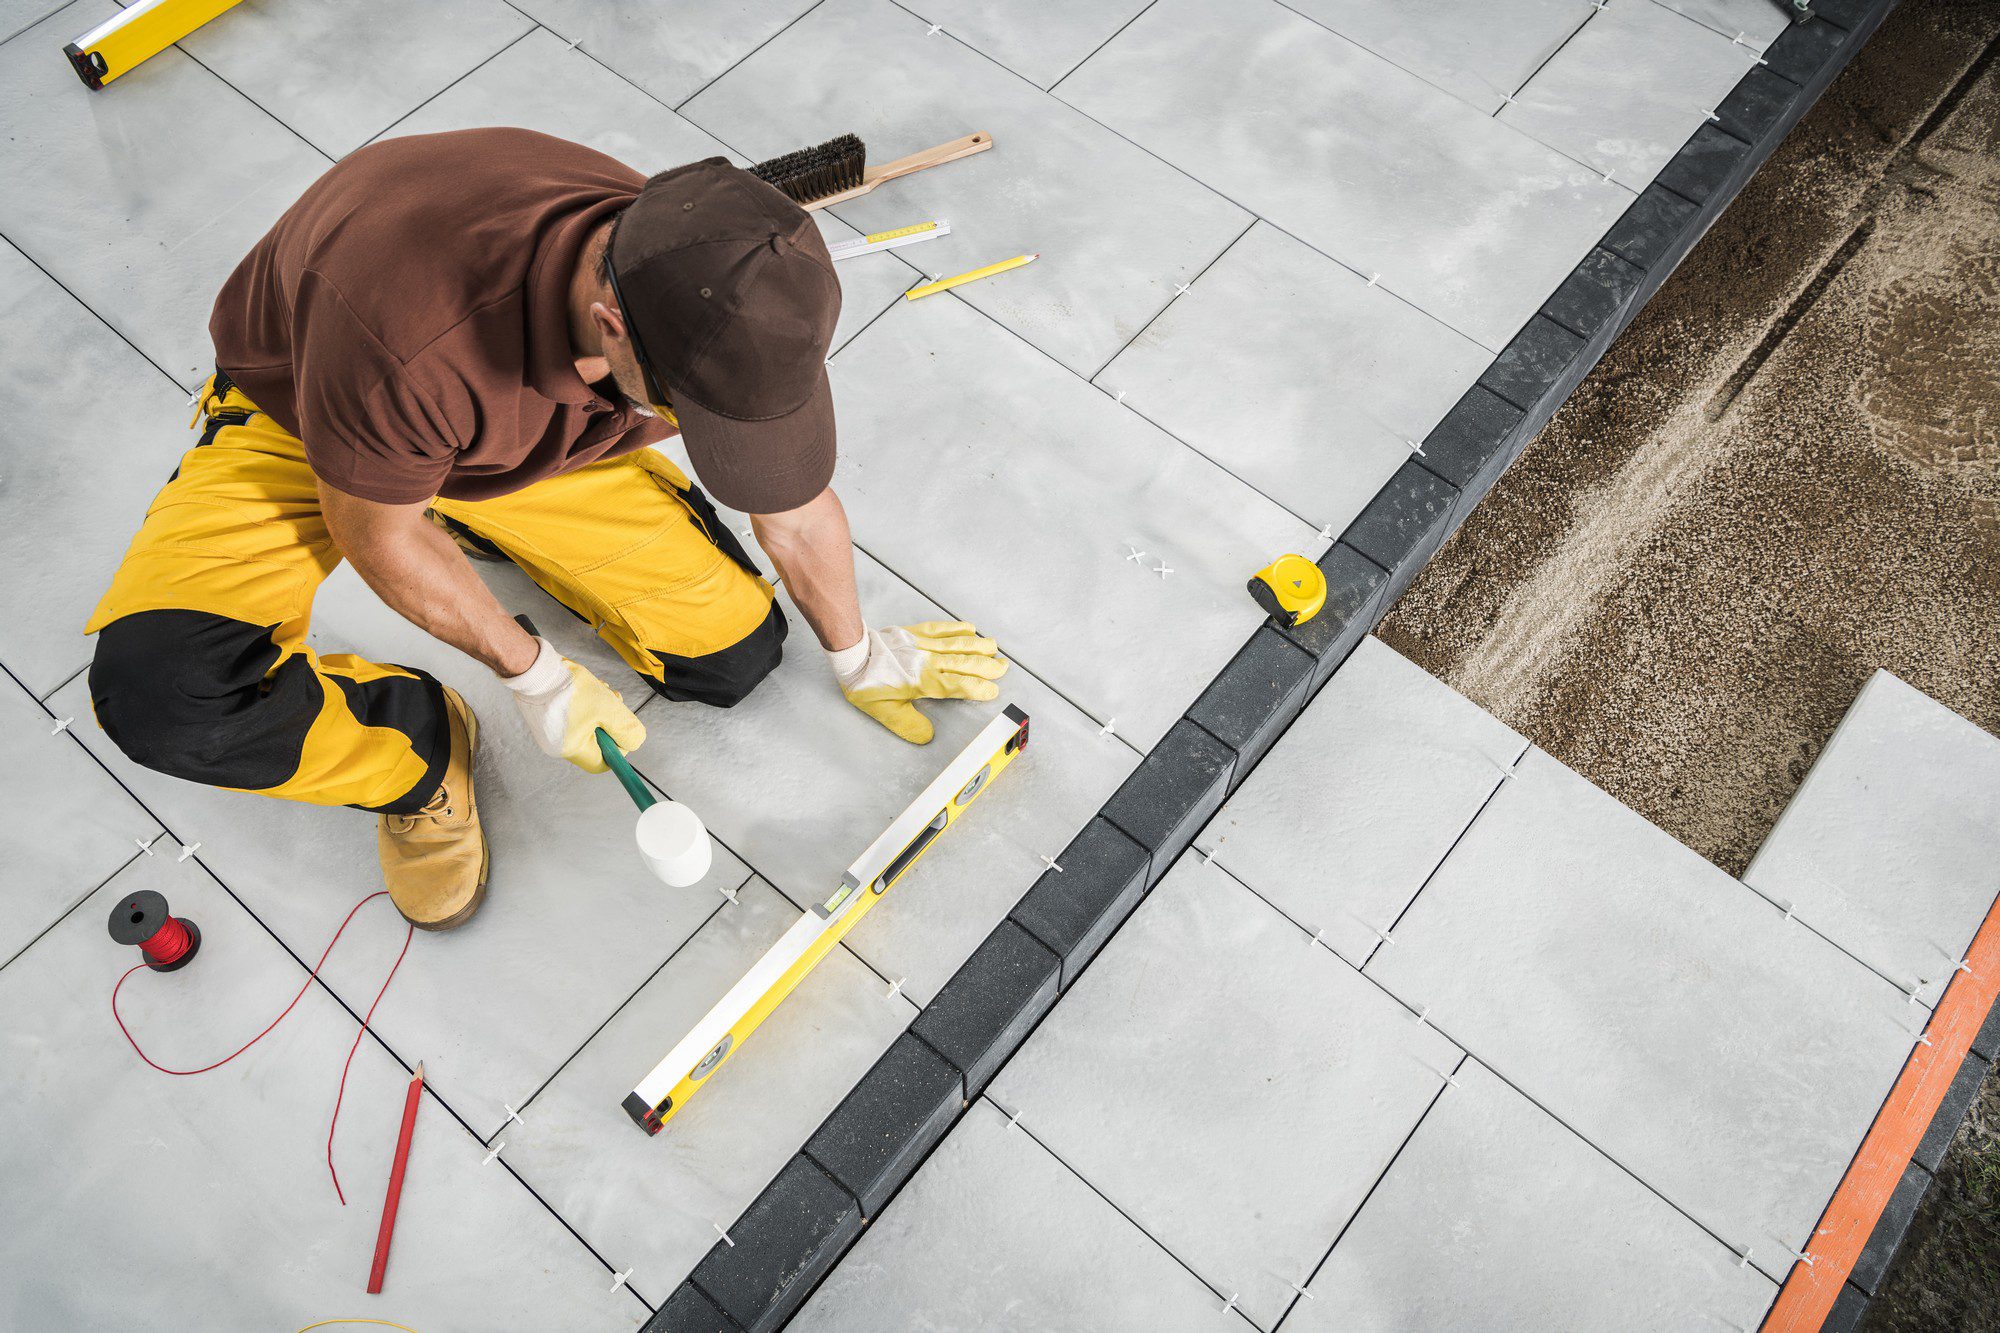 The image shows a person engaged in construction work, specifically laying tiles. The individual is wearing a brown cap, a brown shirt, yellow work pants with knee pads, and safety gloves. The person is kneeling on the gray concrete tiles that have been partially laid, with some areas still incomplete, showing the substrate or base layer where further tiles will be placed.The person appears to be applying or preparing to apply an adhesive using a notched trowel, which is a tool commonly used to spread adhesive in a uniform pattern before laying tiles. There are spacers placed between the tiles to keep them evenly spaced, ensuring a consistent gap for grout.In the surroundings, there are several tools visible, indicating the various stages of tile work: a measuring tape, a spirit level for checking flatness and alignment, a red wire or string that may serve as a guide for laying tiles straight, and a broom handle suggesting ongoing or completed cleanup. The area of work is bordered with a black flexible edge restraint, which might be part of the design or used to contain the substrate.Overall, the image captures a moment of manual labour in the construction or renovation industry, with a focus on tile installation.